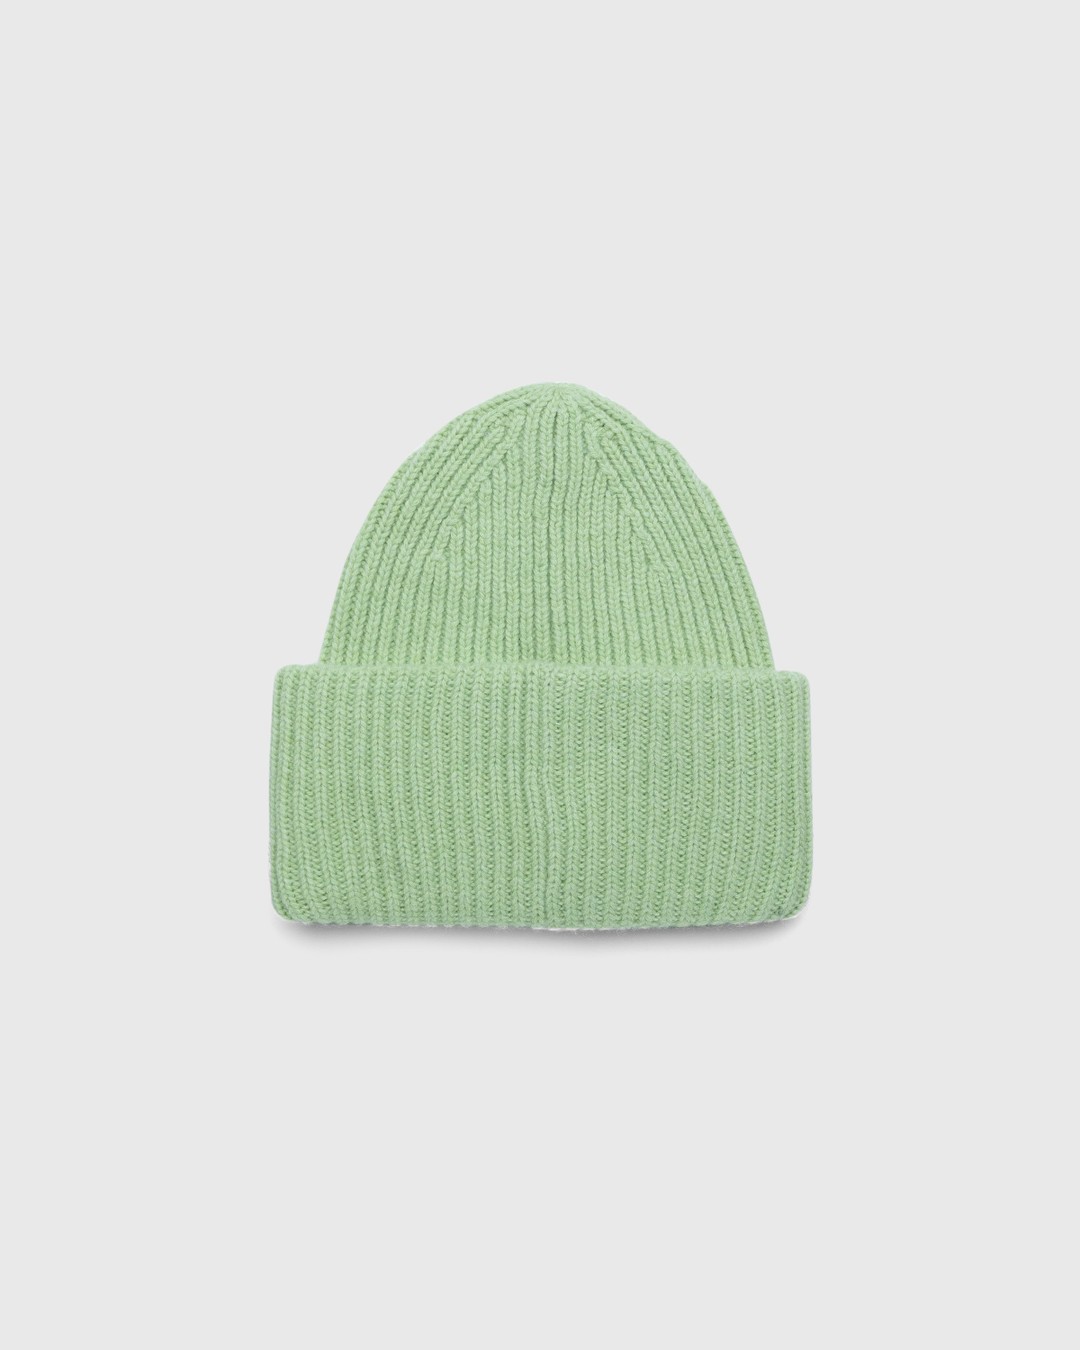 Acne Studios – Knit Face Patch Beanie Pale Green - Beanies - Green - Image 2